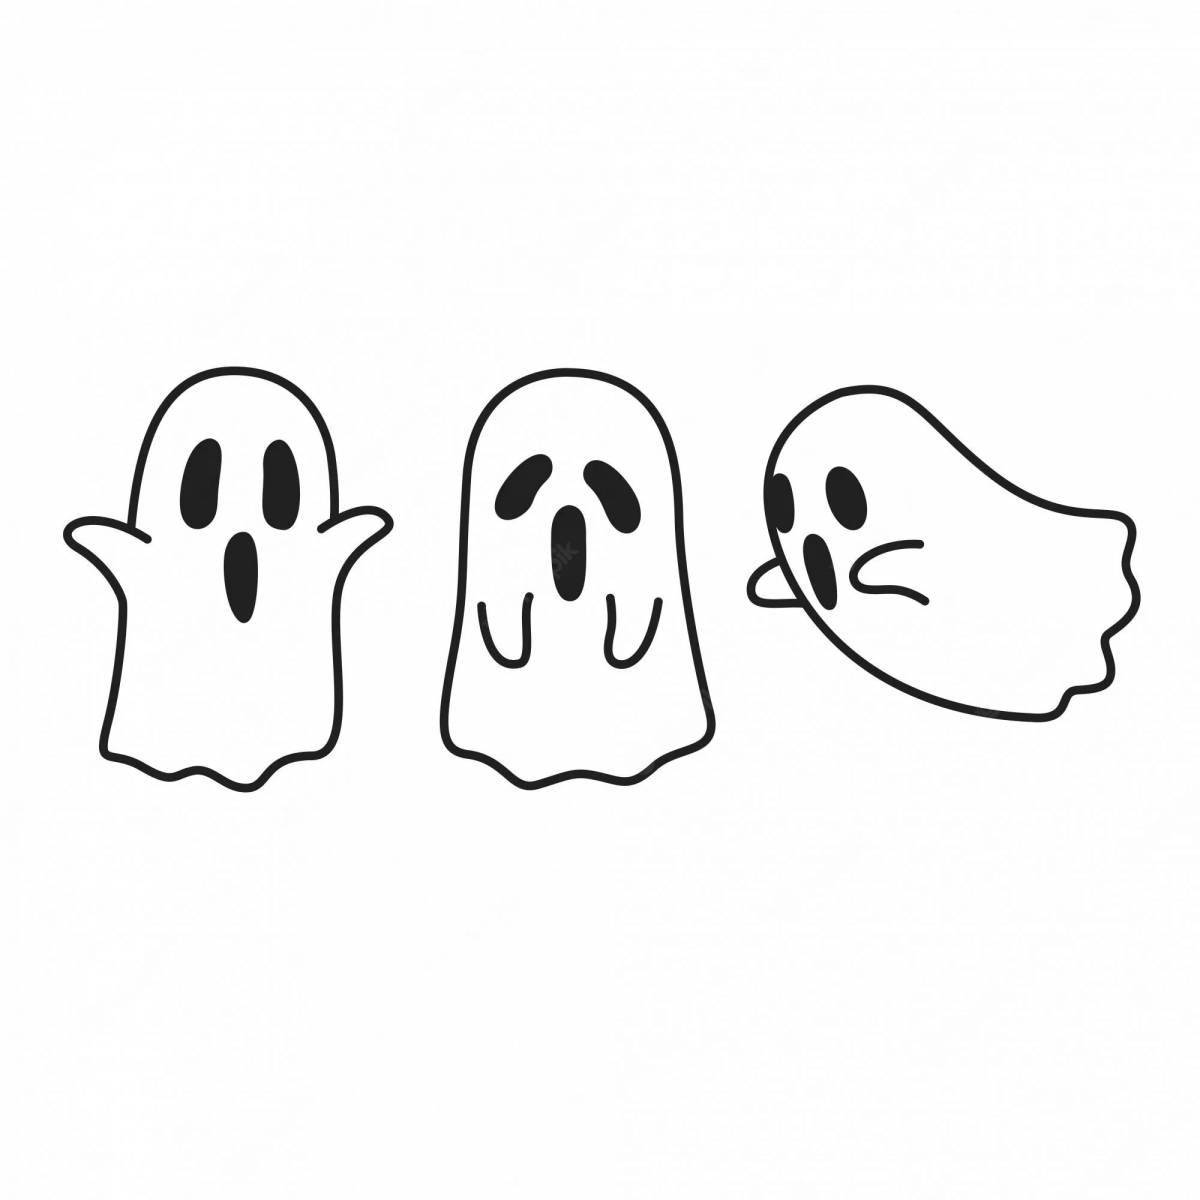 Adorable cute ghost coloring page